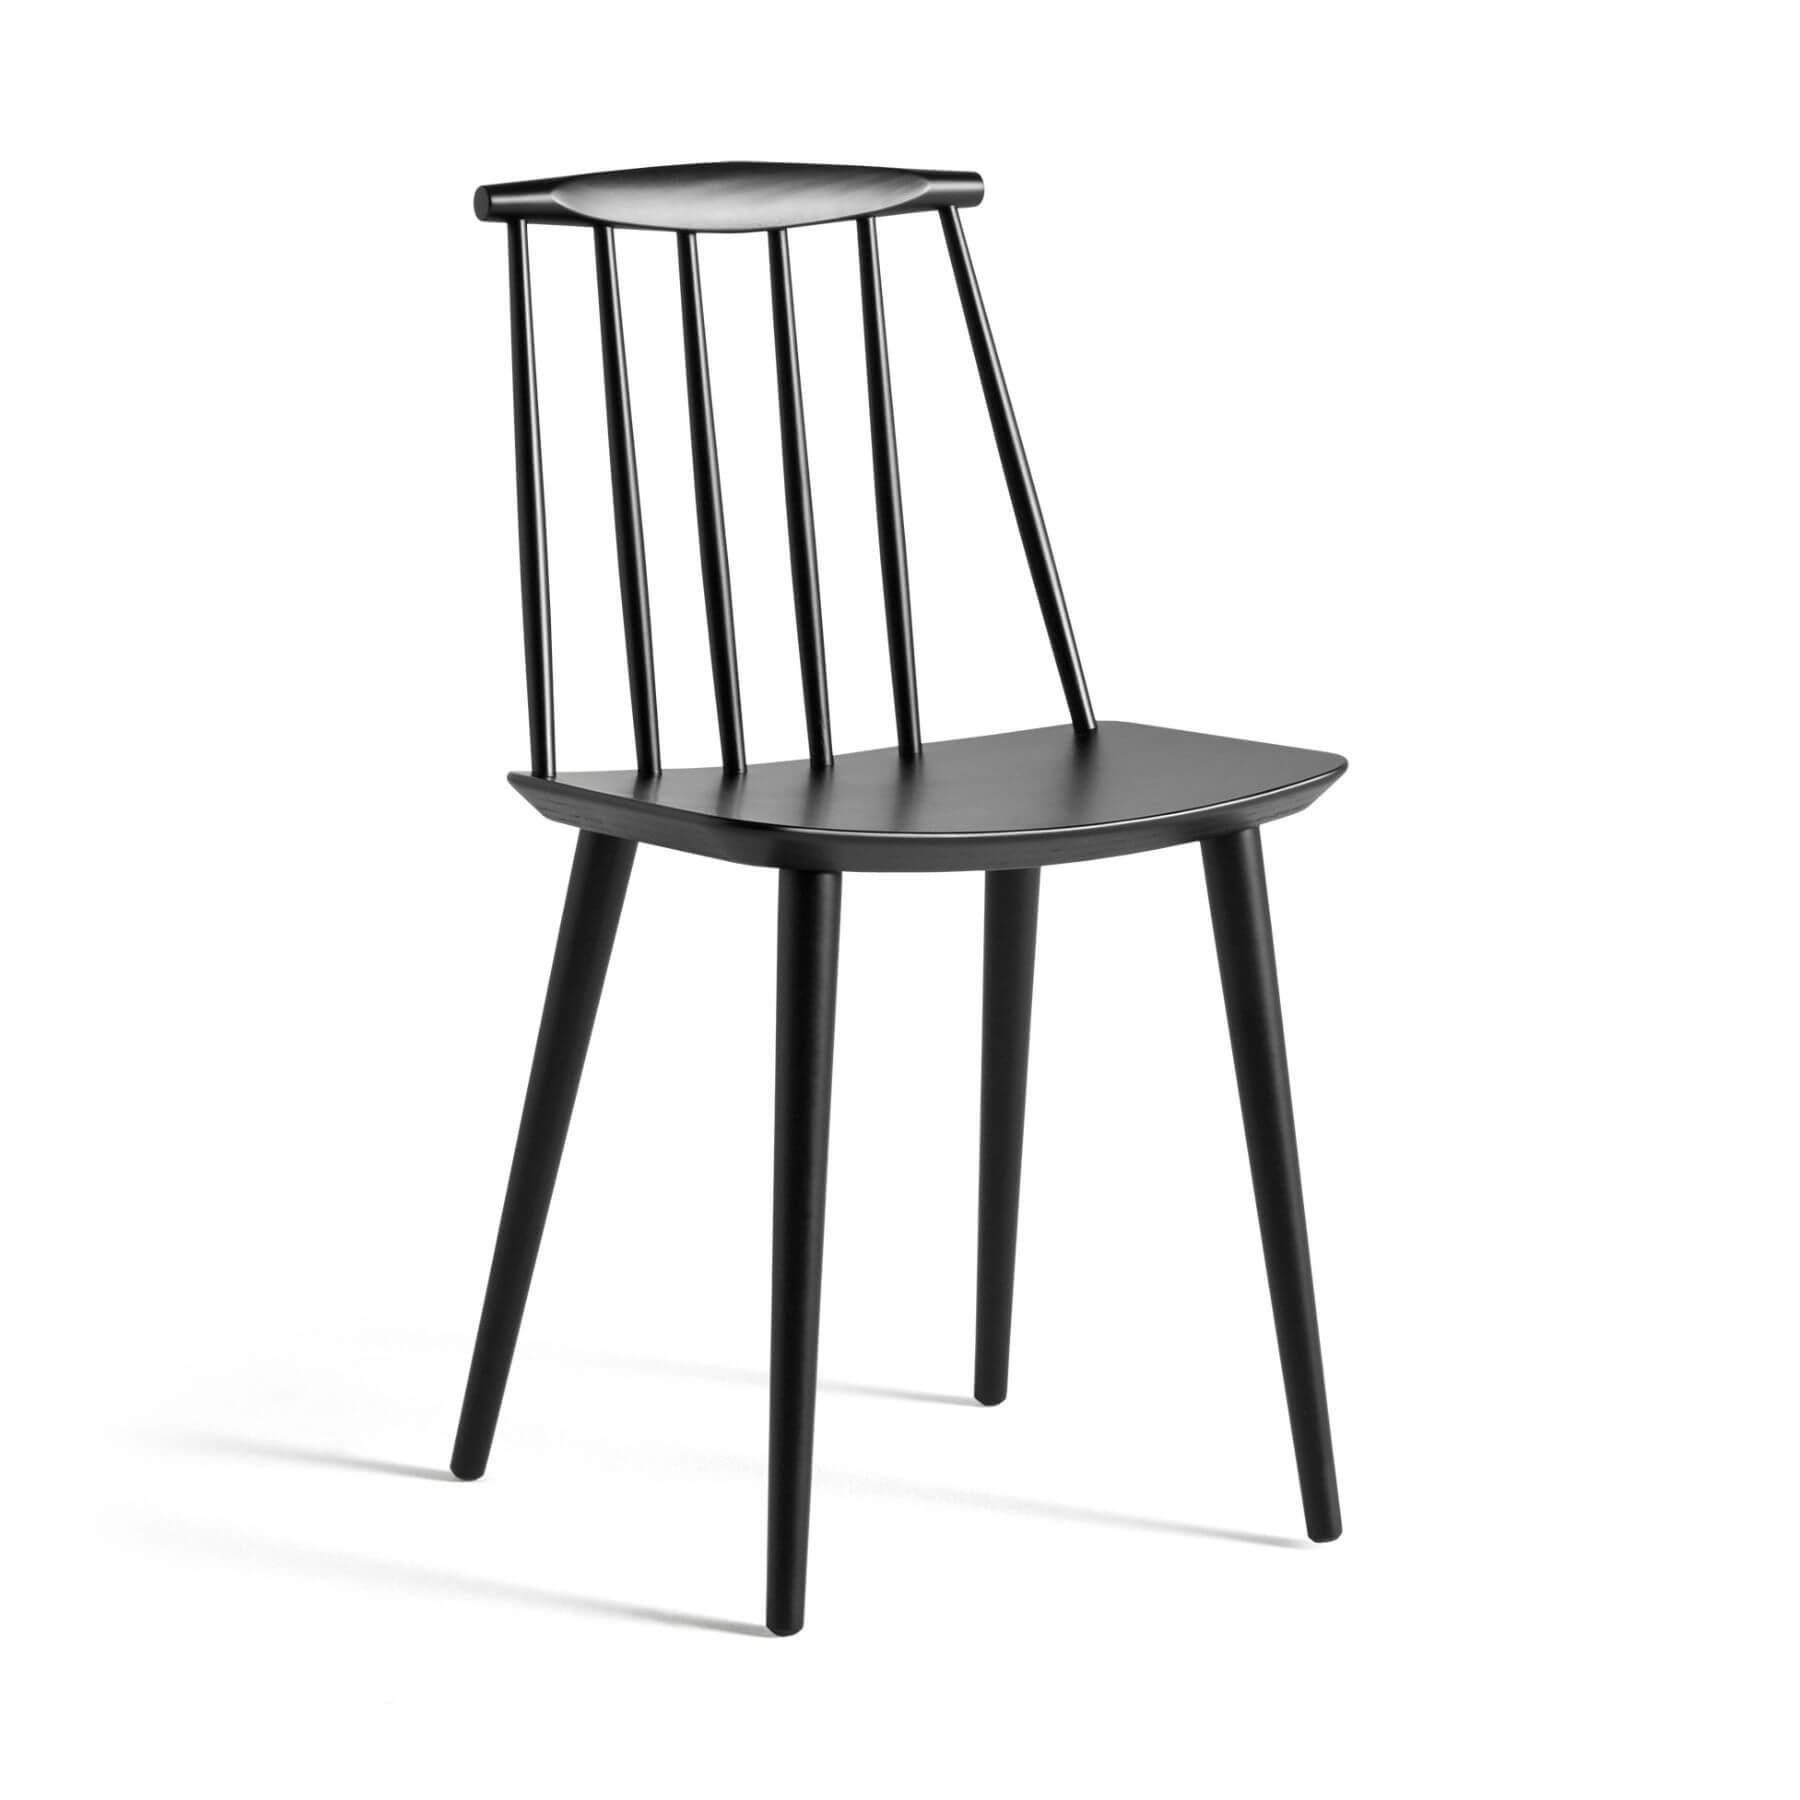 Hay Jseries 77 Dining Chair Beech Lacquered Black Designer Furniture From Holloways Of Ludlow